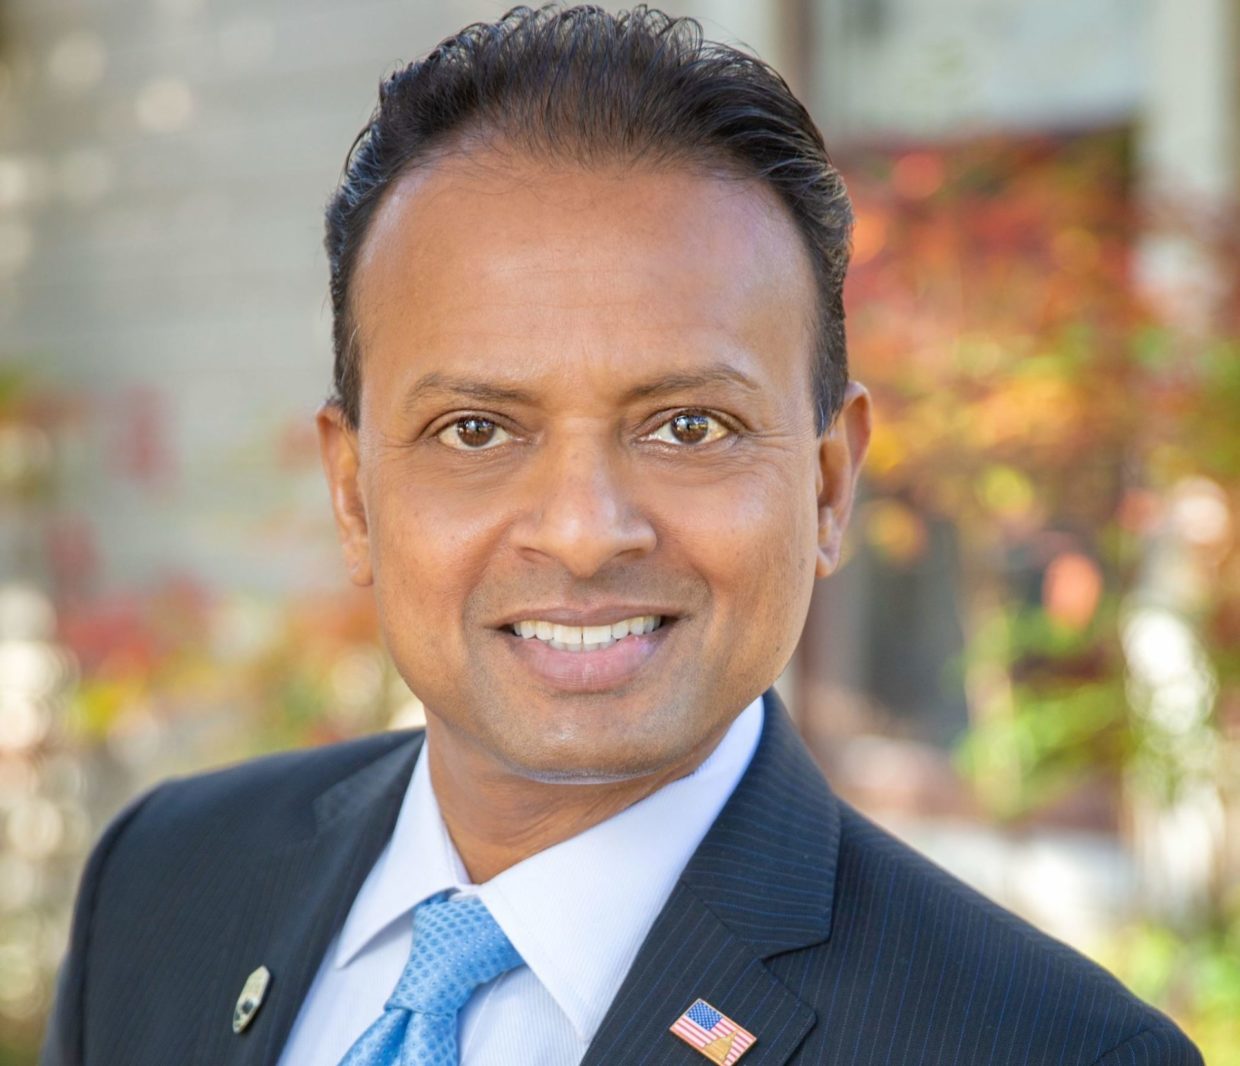 Interview: Talking COVID, politics, and youth empowerment with Congressional Candidate Rishi Kumar